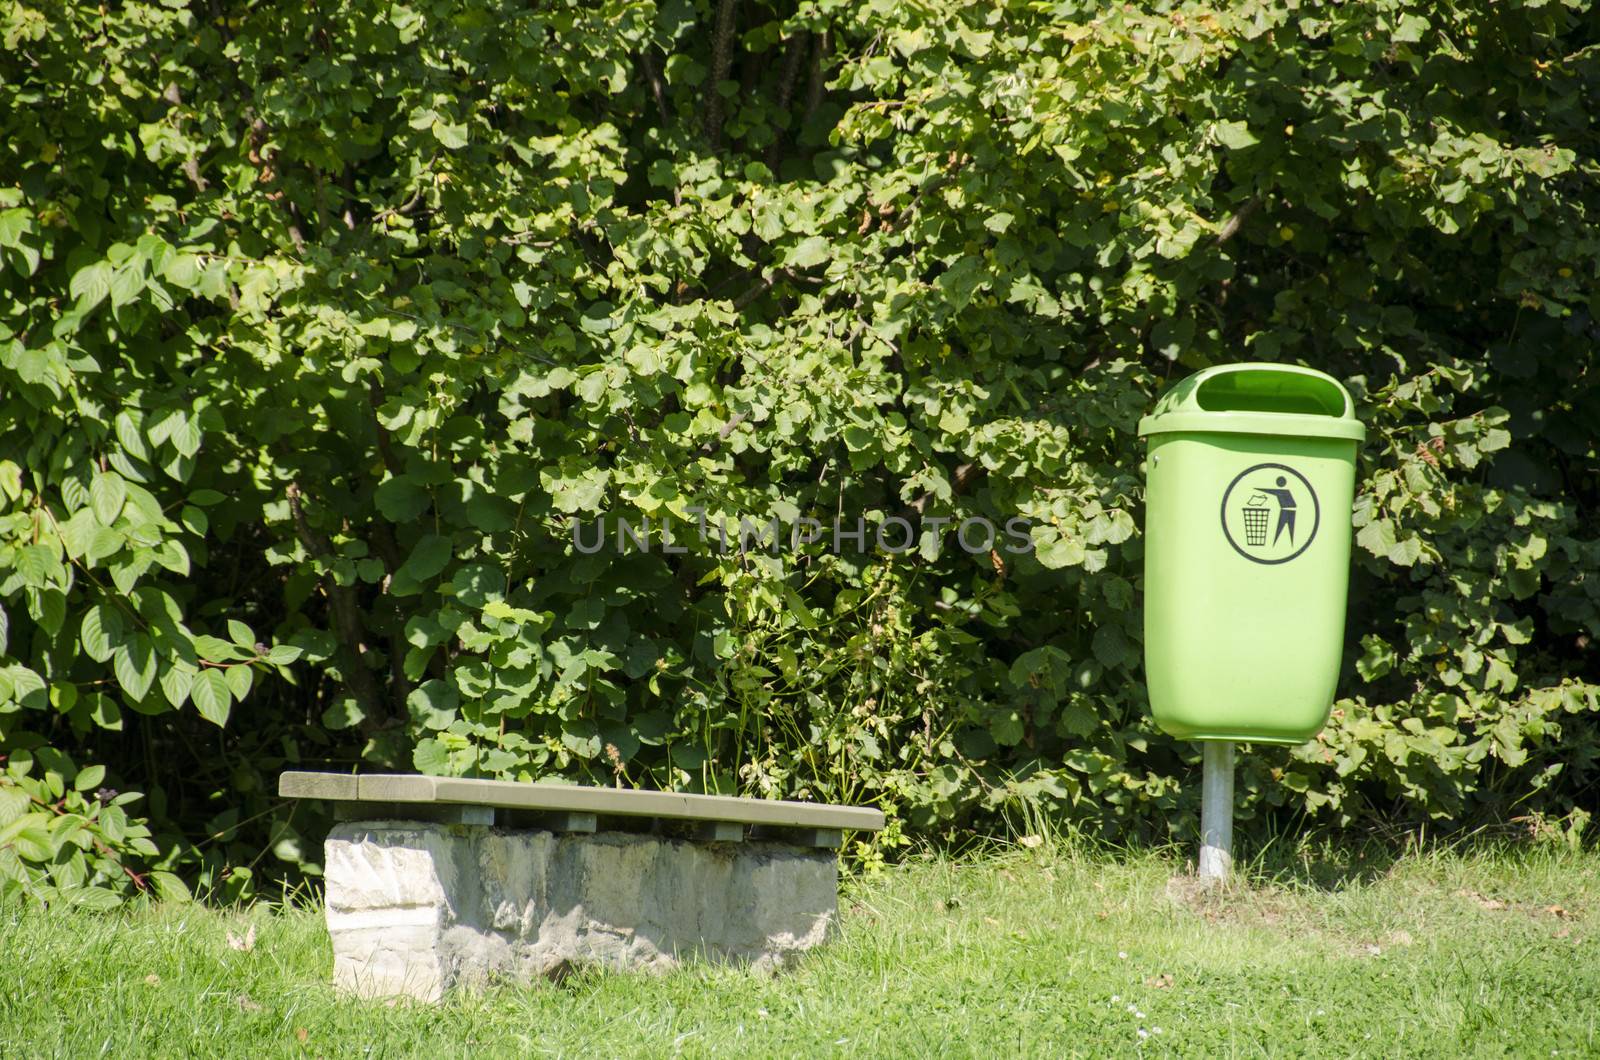 Green waste bin in a park with a park bench